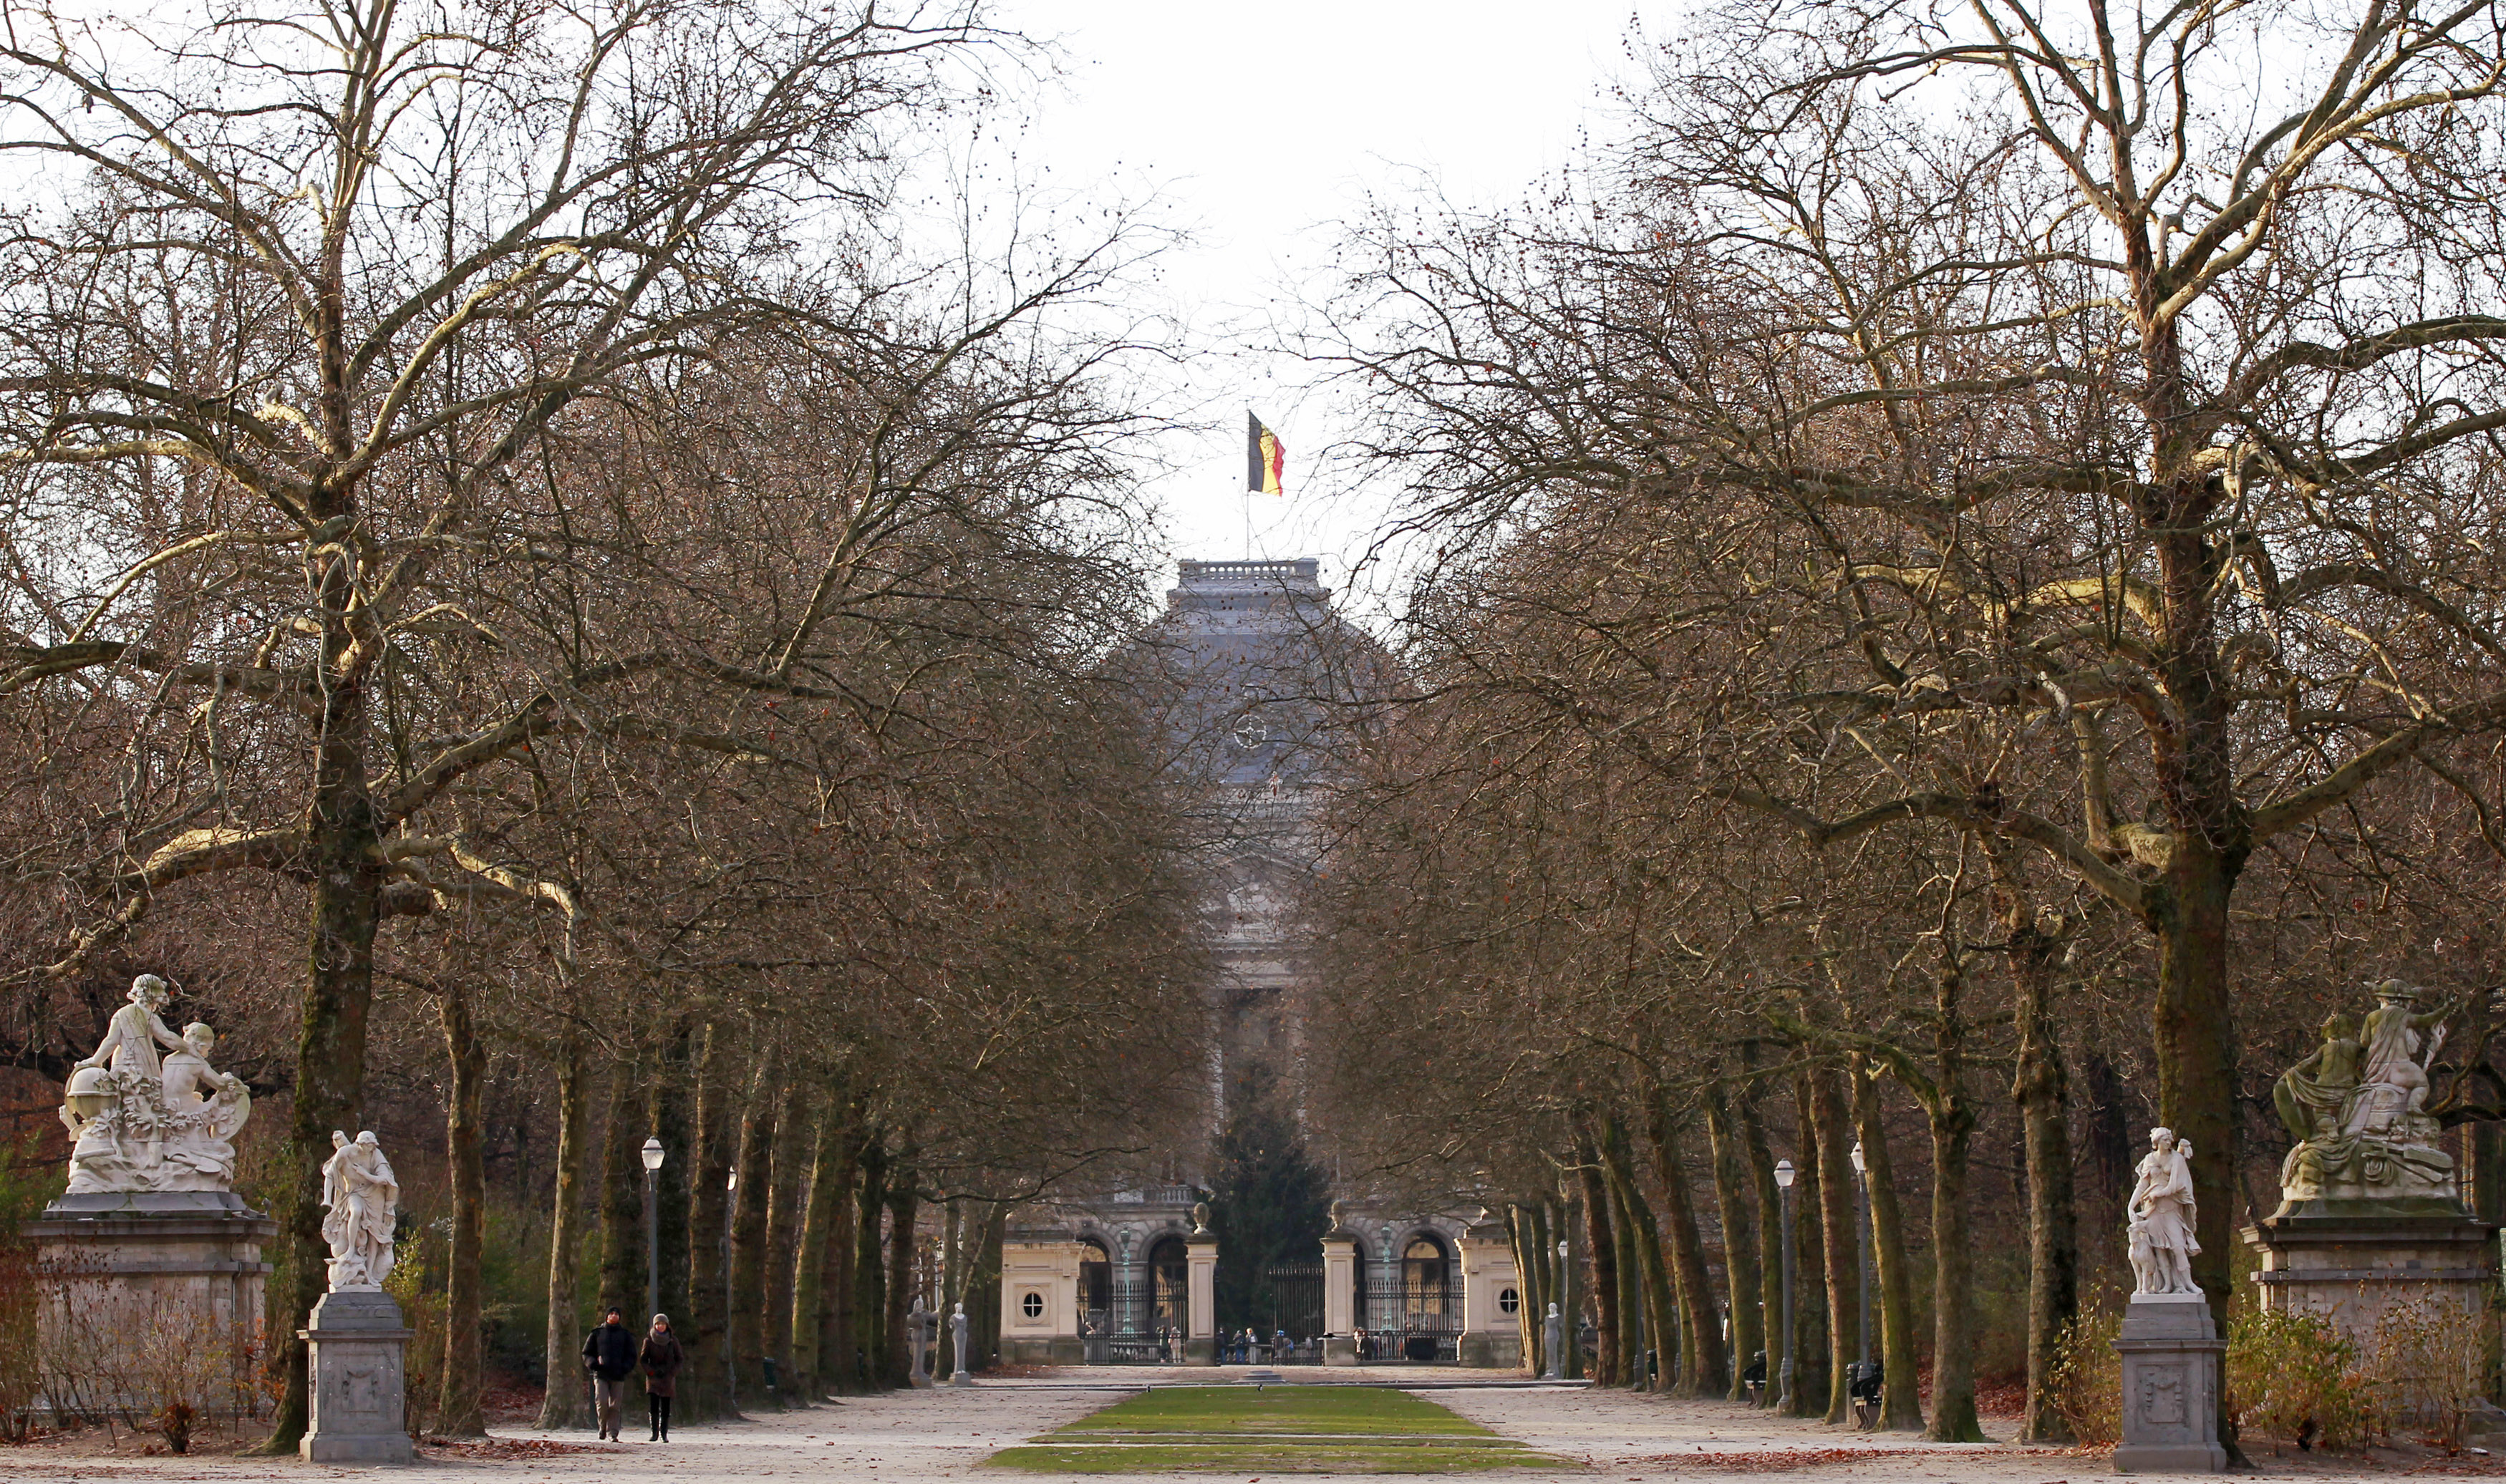 Pedestrians walk in a park as the Belgian national flag flies over the Royal Palace in Brussels